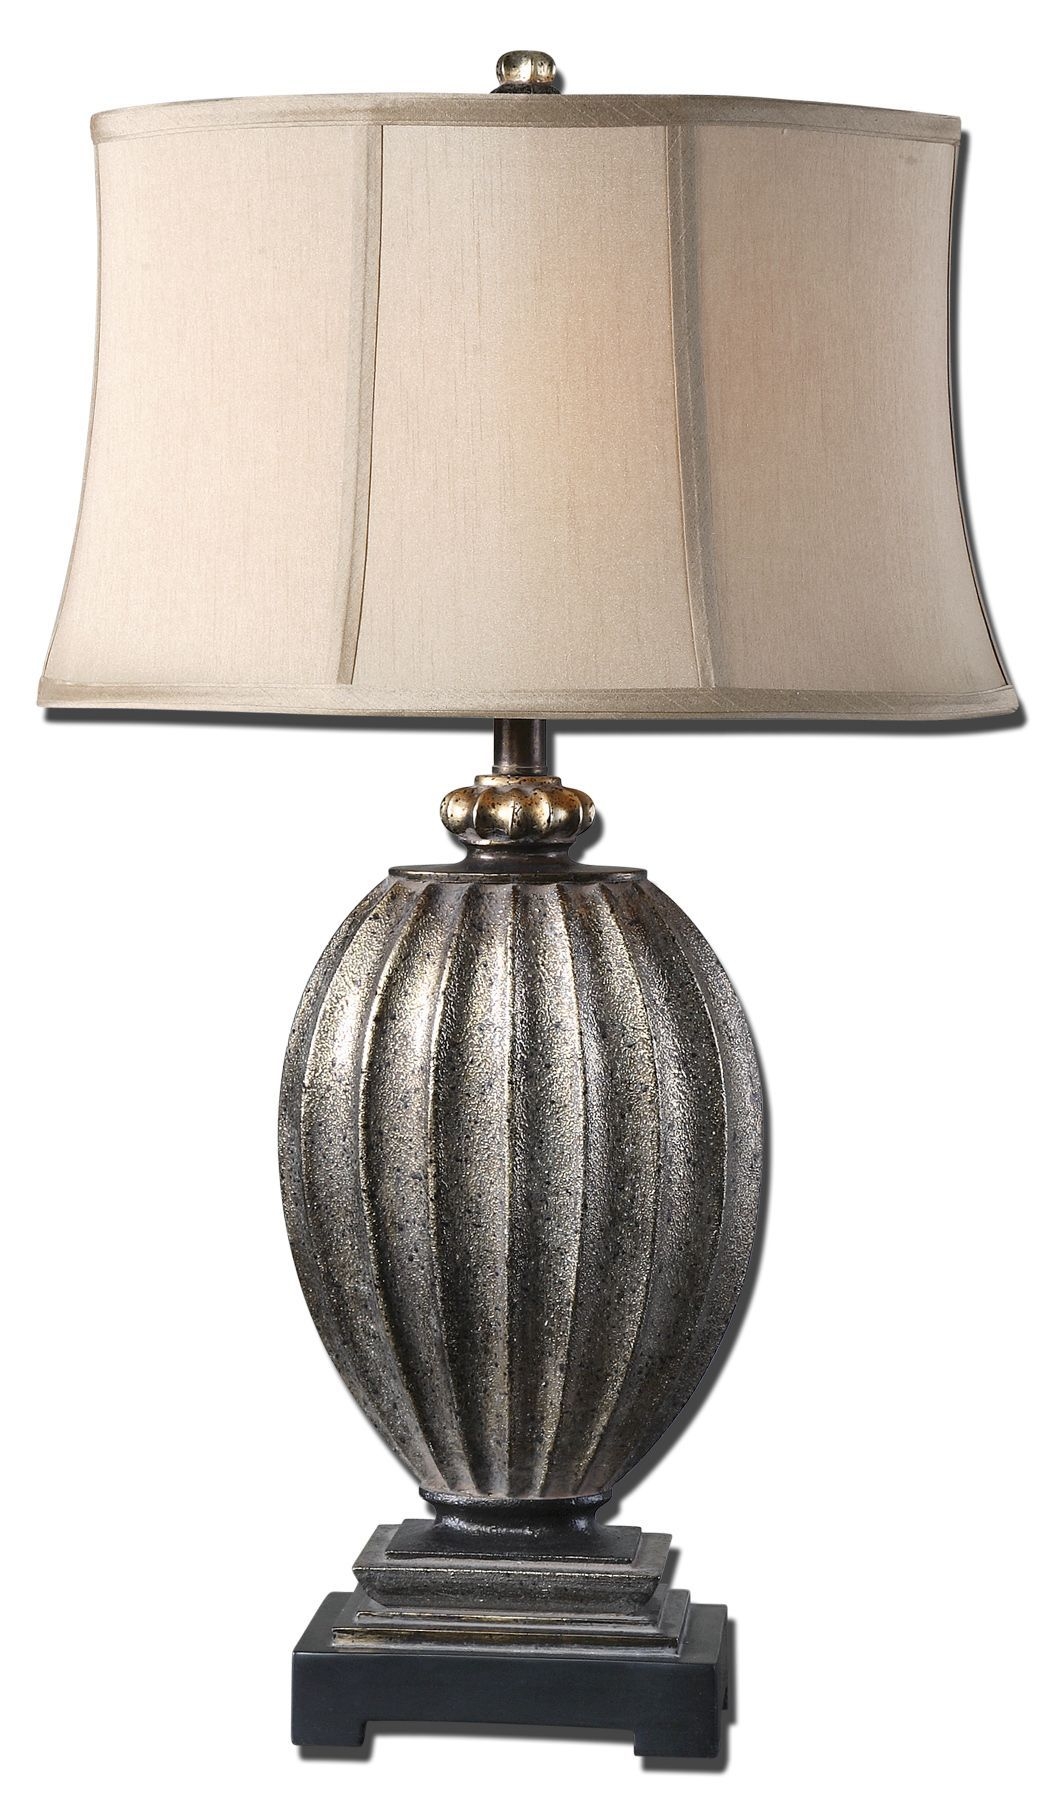 Diveria 30.5" H Table Lamp with Oval Shade